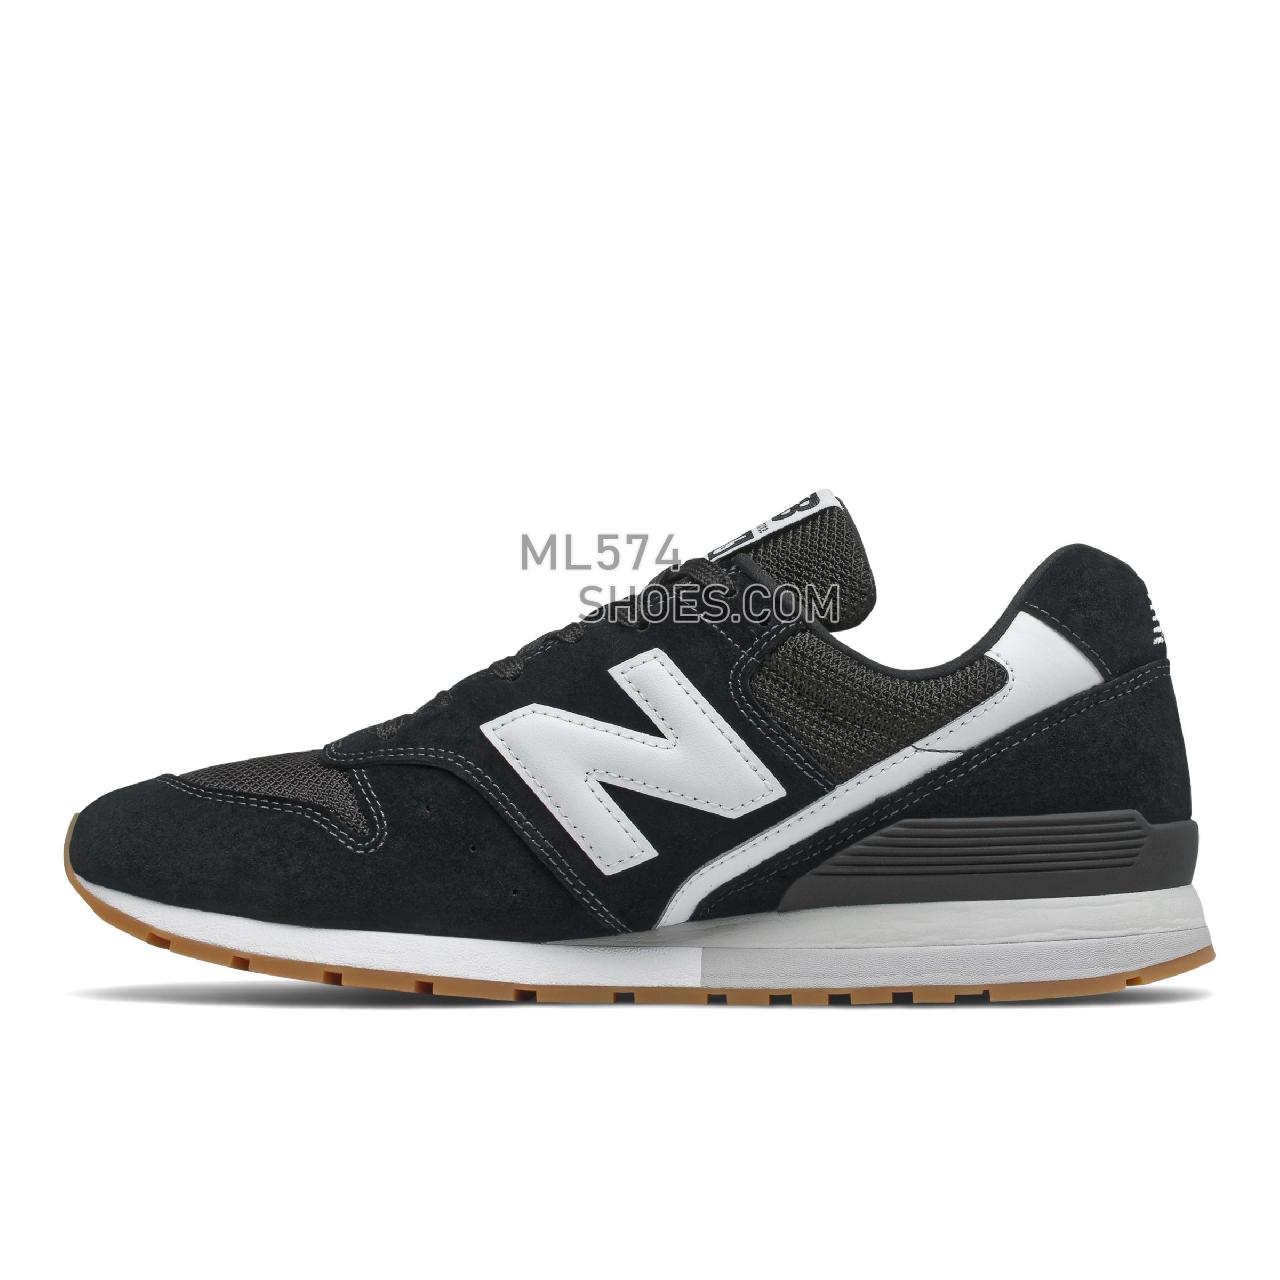 New Balance 996v2 - Men's Classic Sneakers - Black with White - CM996CPG